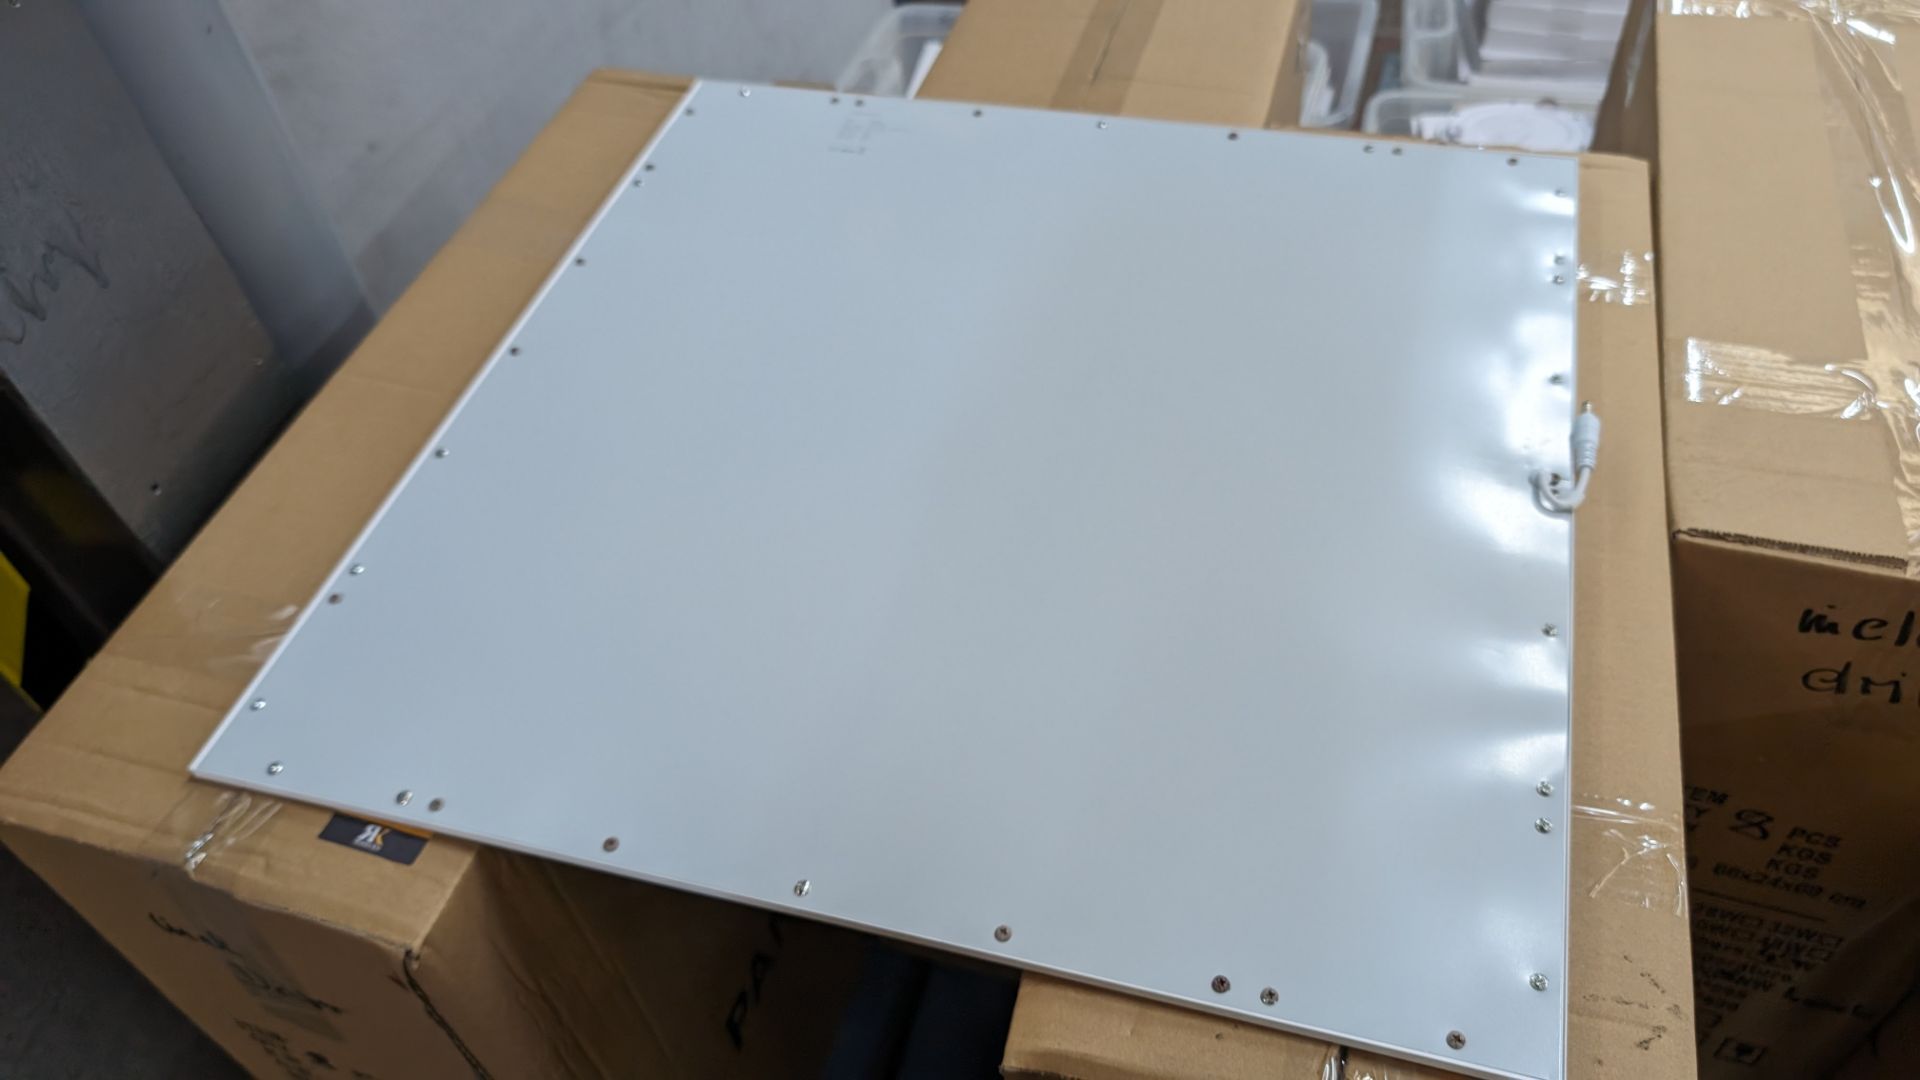 24 off 595mm x 595mm 4000k 45w LED lighting panel, each including driver. This lot comprises 3 cart - Image 4 of 5